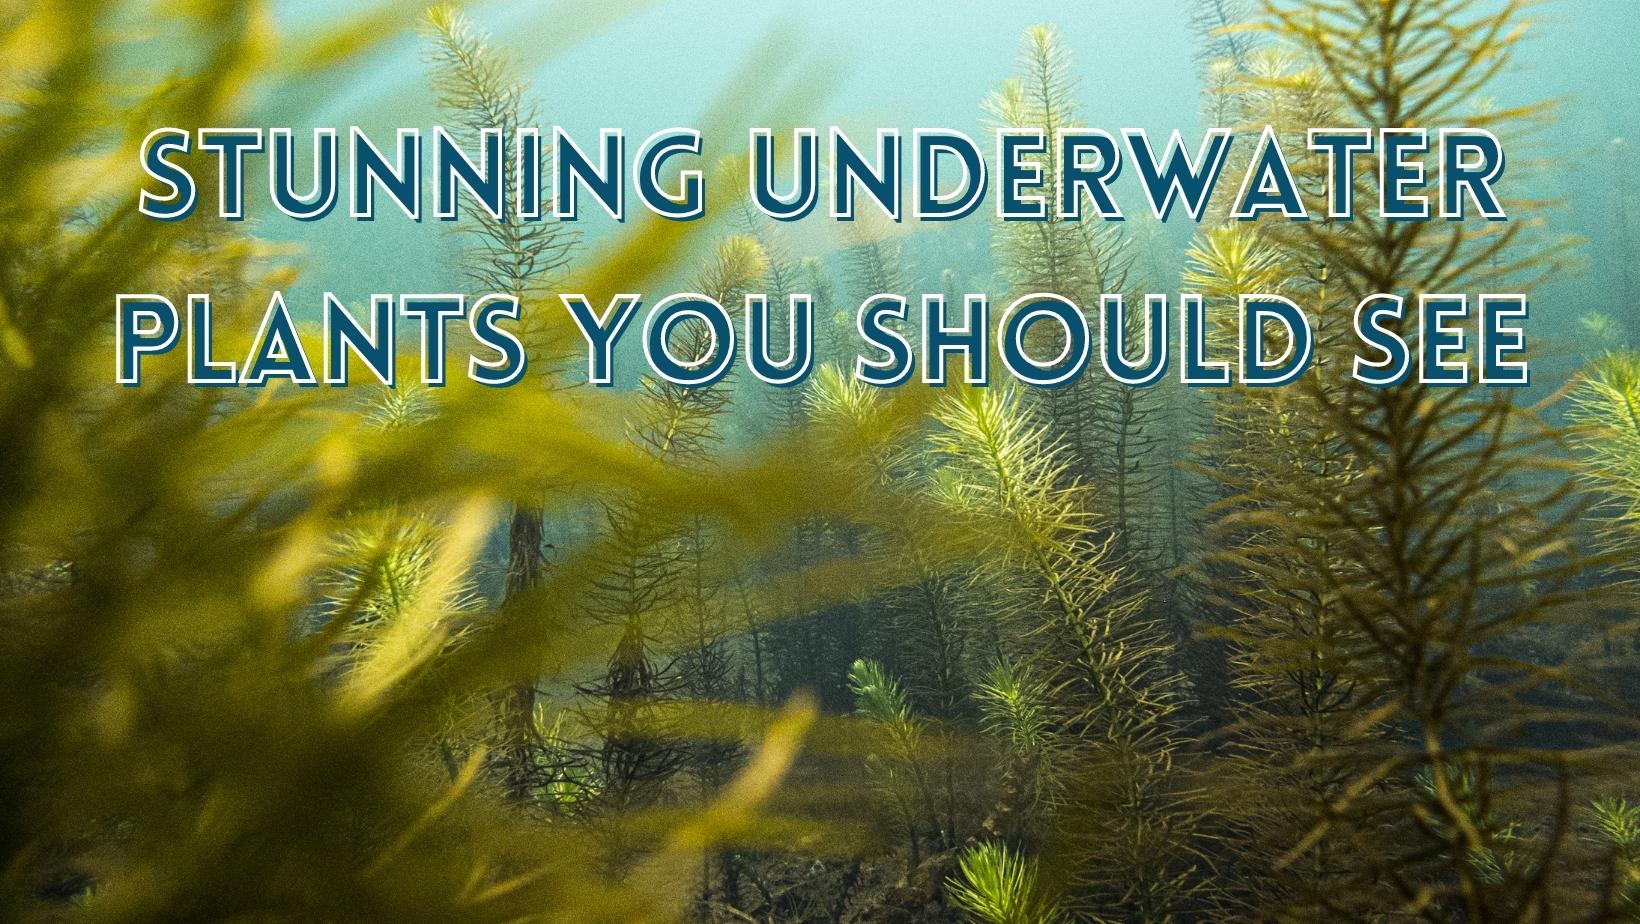 Stunning underwater plants you should see